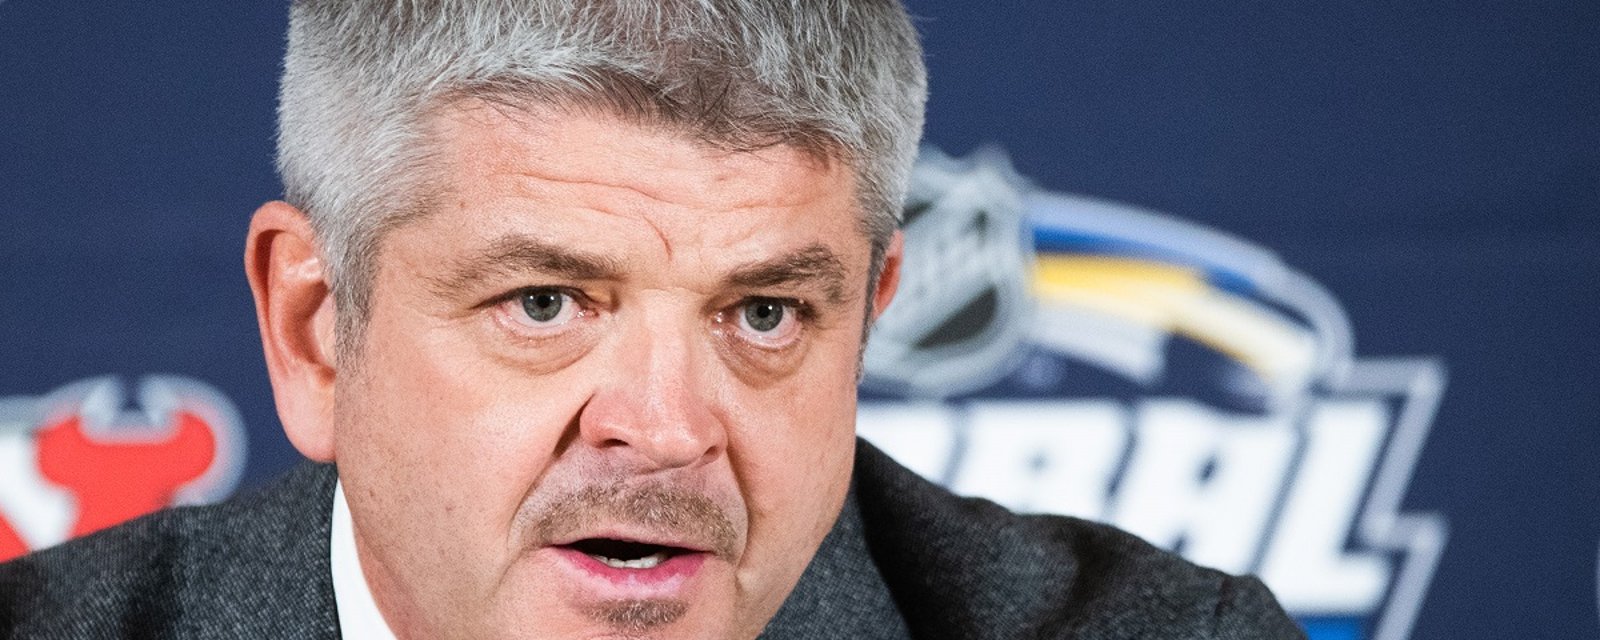 Todd McLellan calls out his own players, says some do not belong in the NHL.